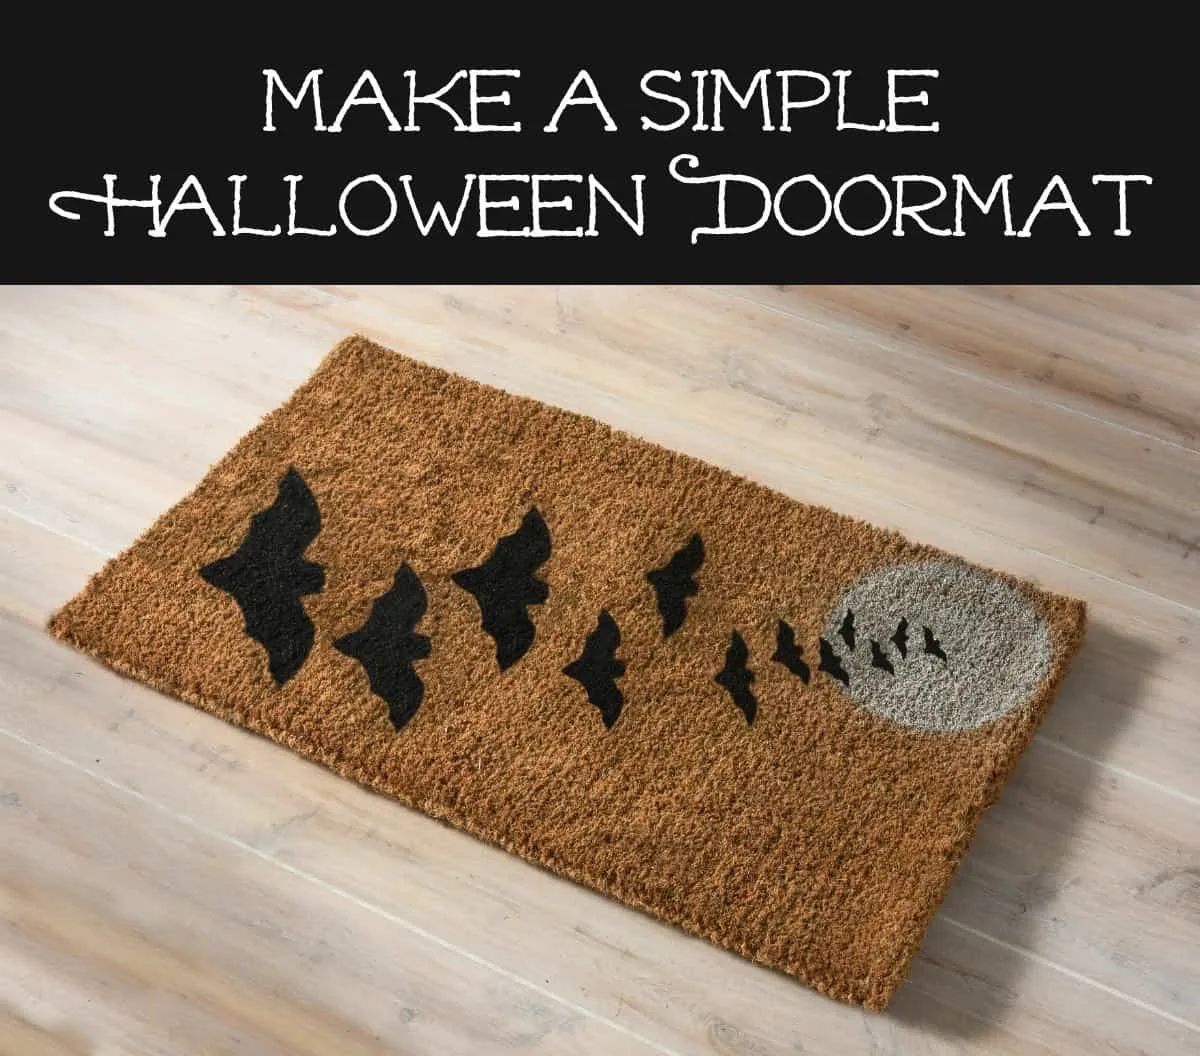 Make A Simple Doormat With